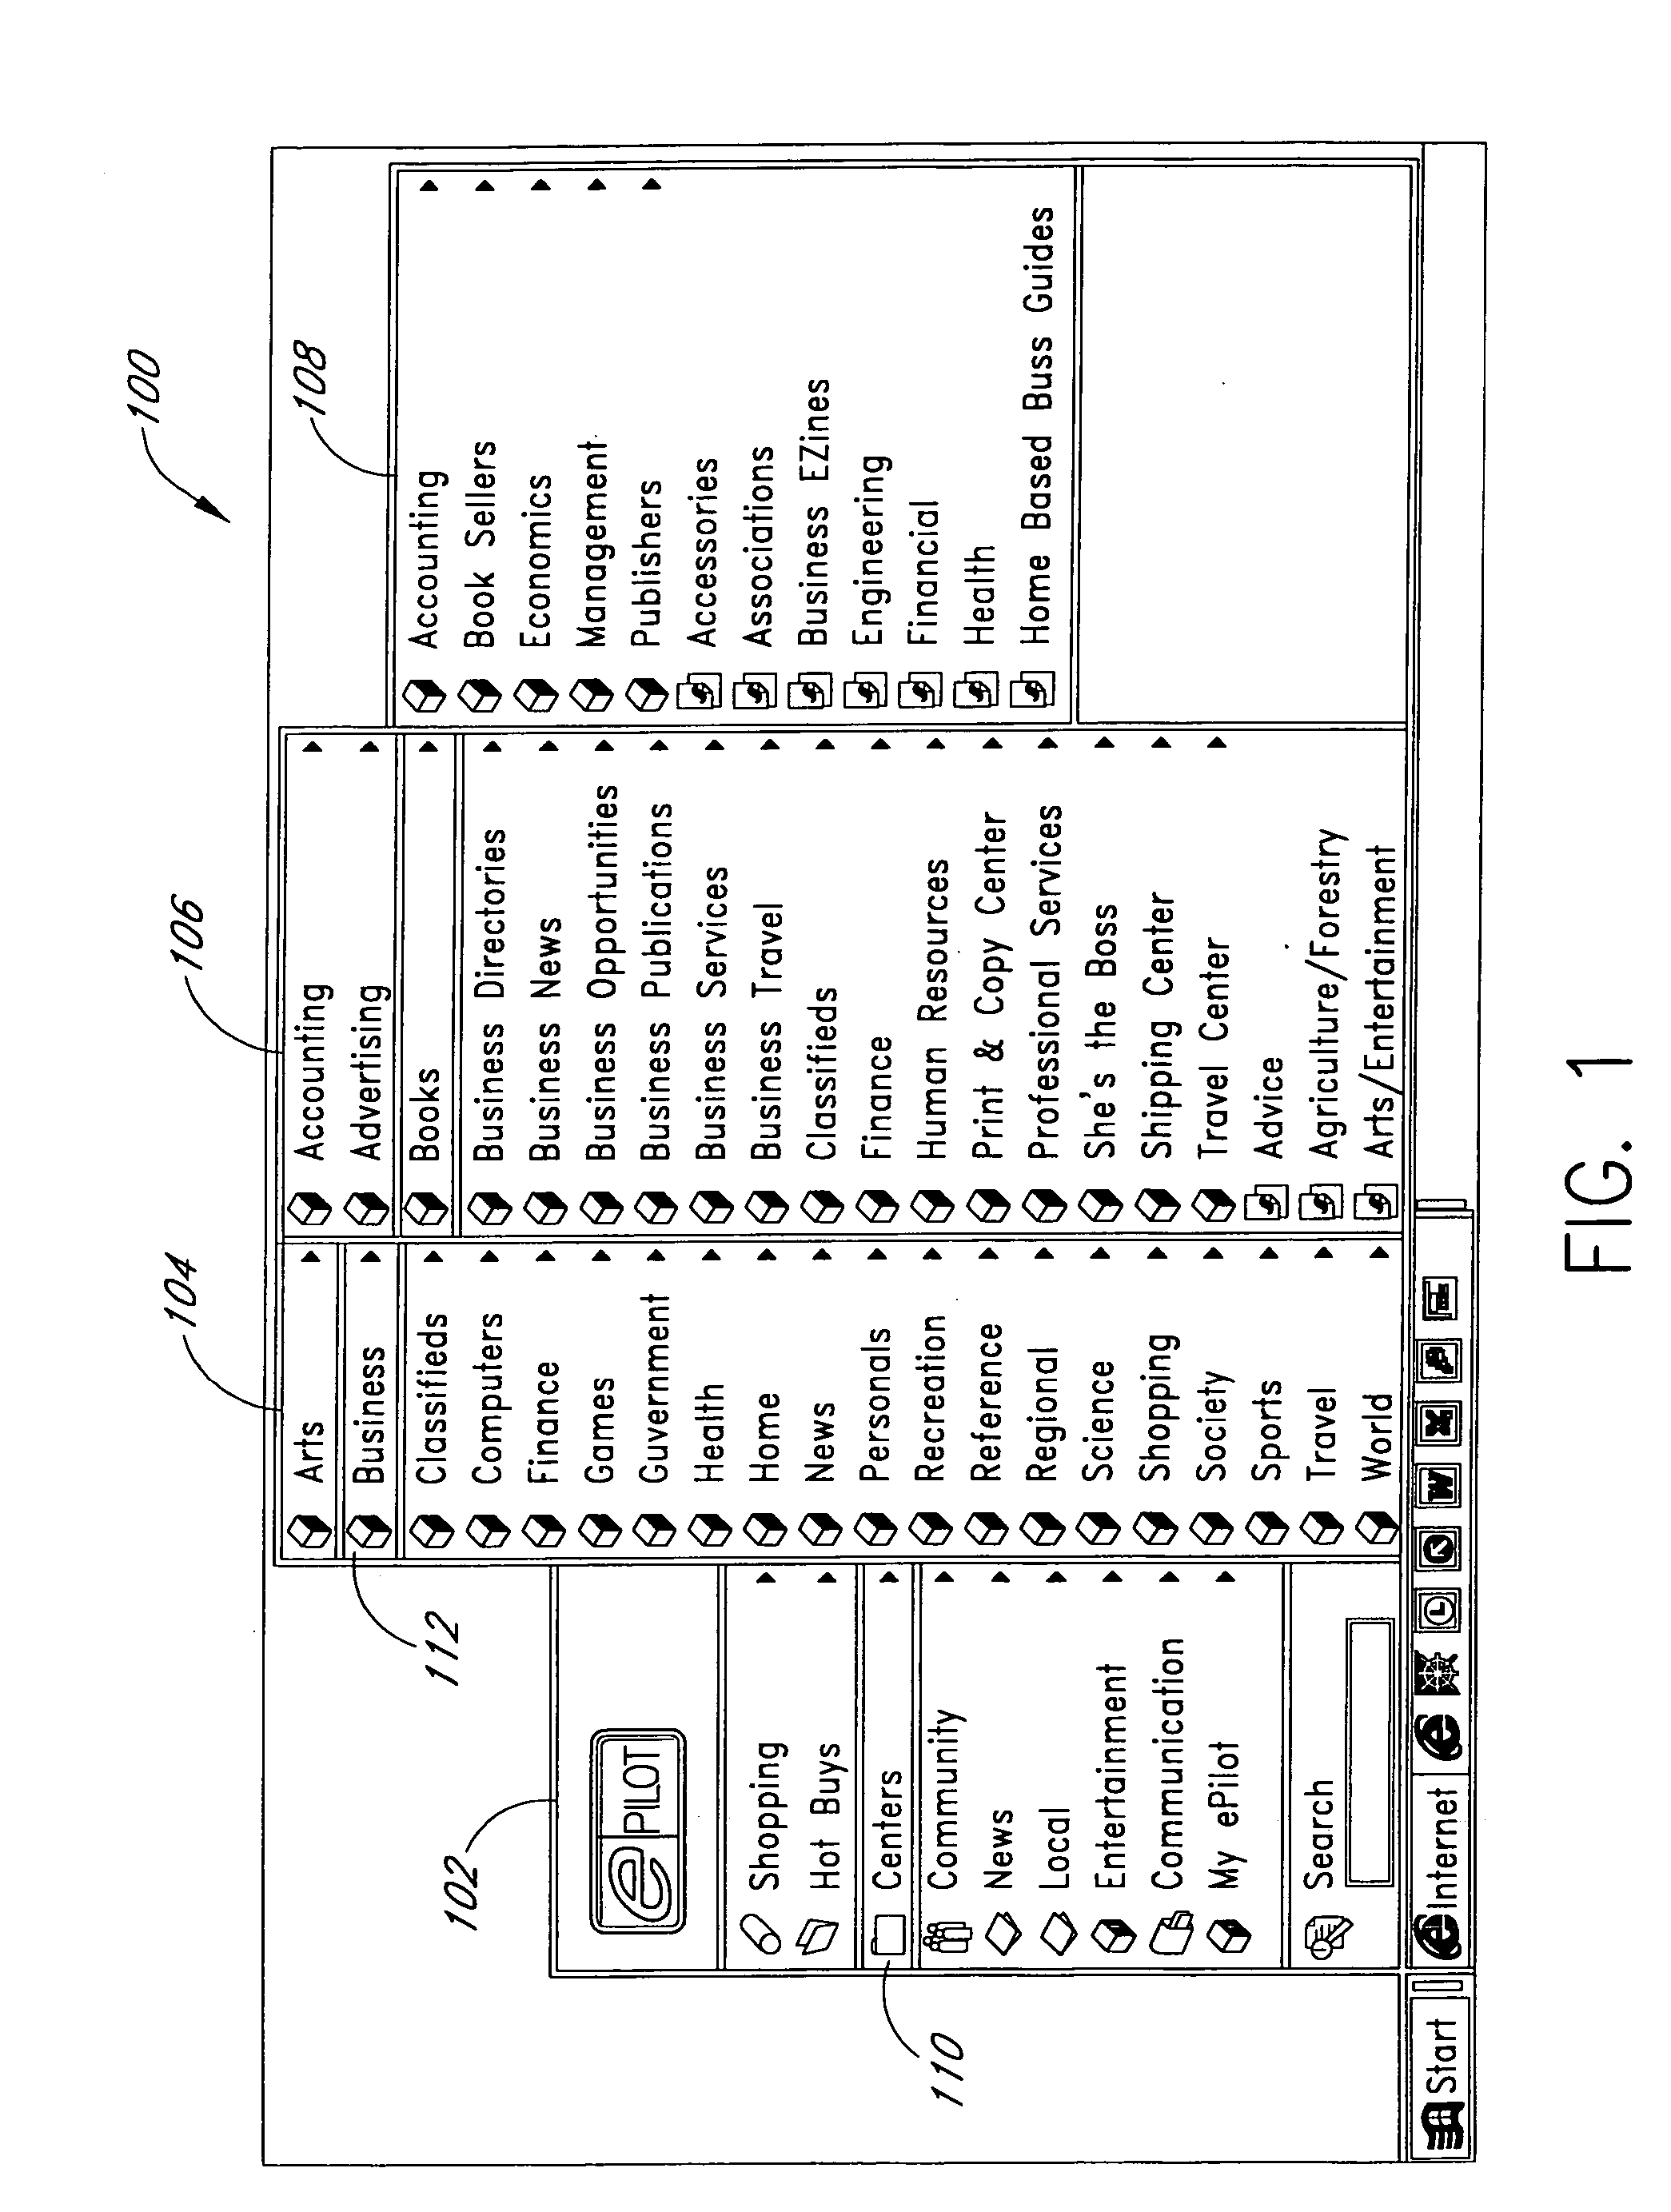 Methods and systems for a dynamic networked commerce architecture